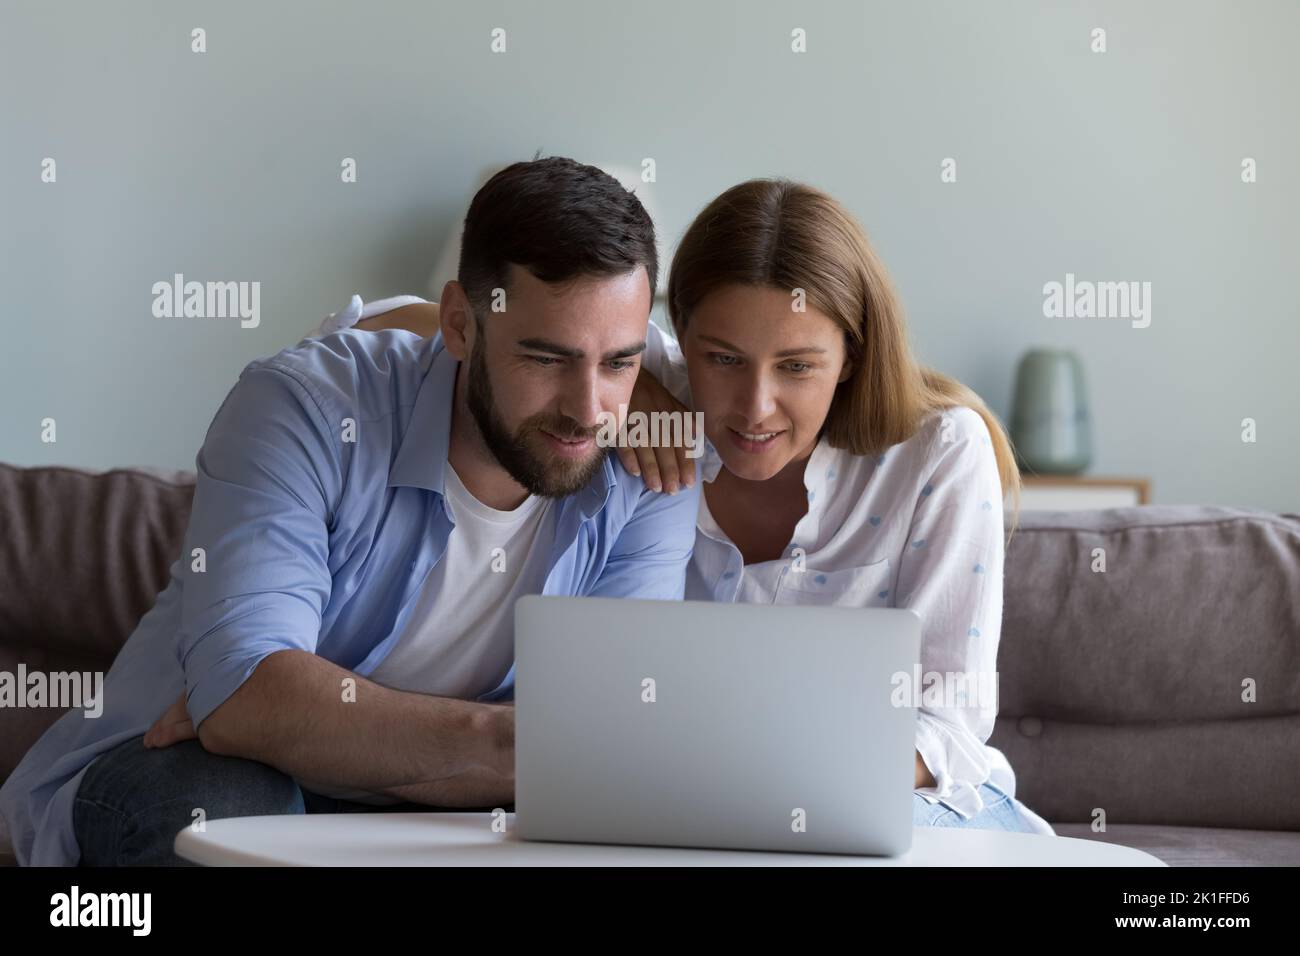 Focused positive millennial married couple sitting on couch at laptop Stock Photo